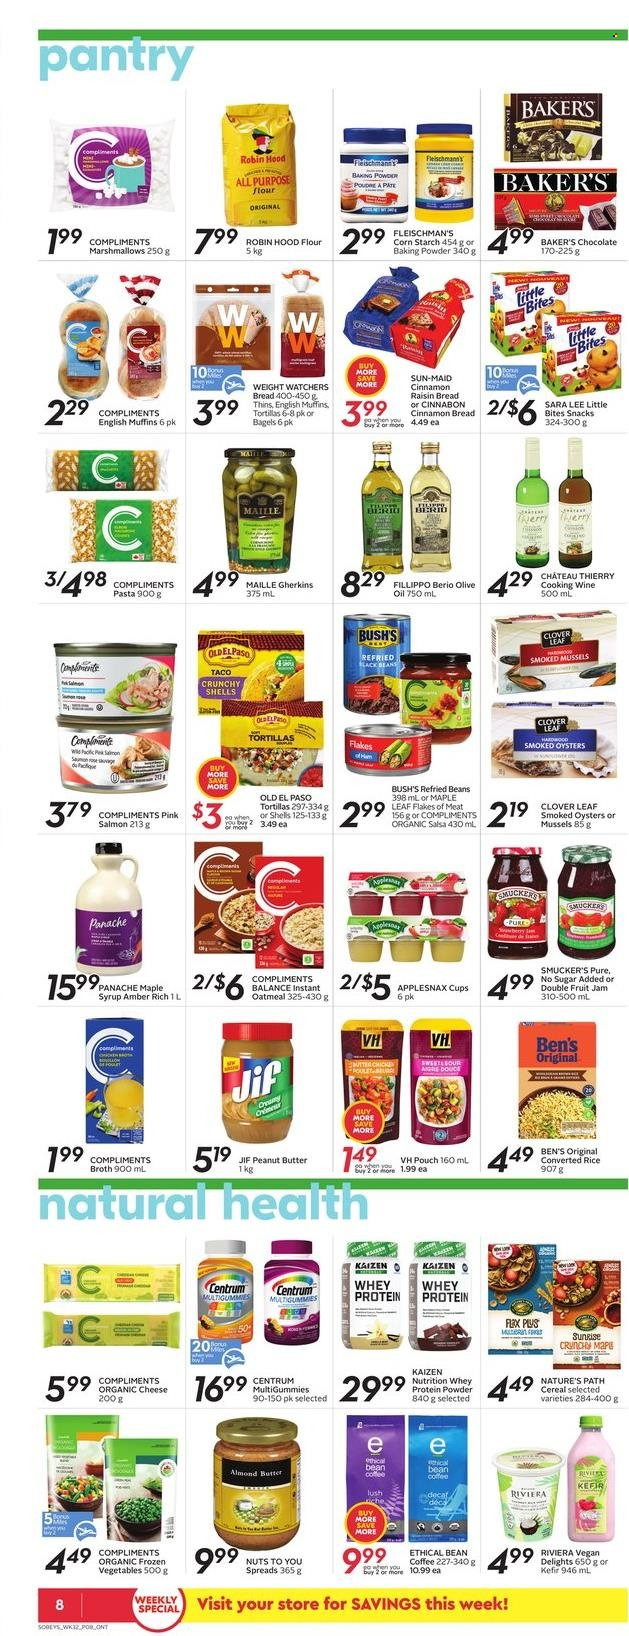 thumbnail - Sobeys Flyer - December 02, 2021 - December 08, 2021 - Sales products - bagels, bread, english muffins, tortillas, Old El Paso, Sara Lee, mussels, salmon, smoked oysters, oysters, pasta, cheese, Clover, kefir, frozen vegetables, marshmallows, chocolate, snack, Little Bites, Thins, baking powder, oatmeal, broth, refried beans, cereals, rice, salsa, olive oil, oil, maple syrup, fruit jam, peanut butter, syrup, Jif, coffee, cooking wine, wine, Ethical, whey protein, Centrum. Page 8.